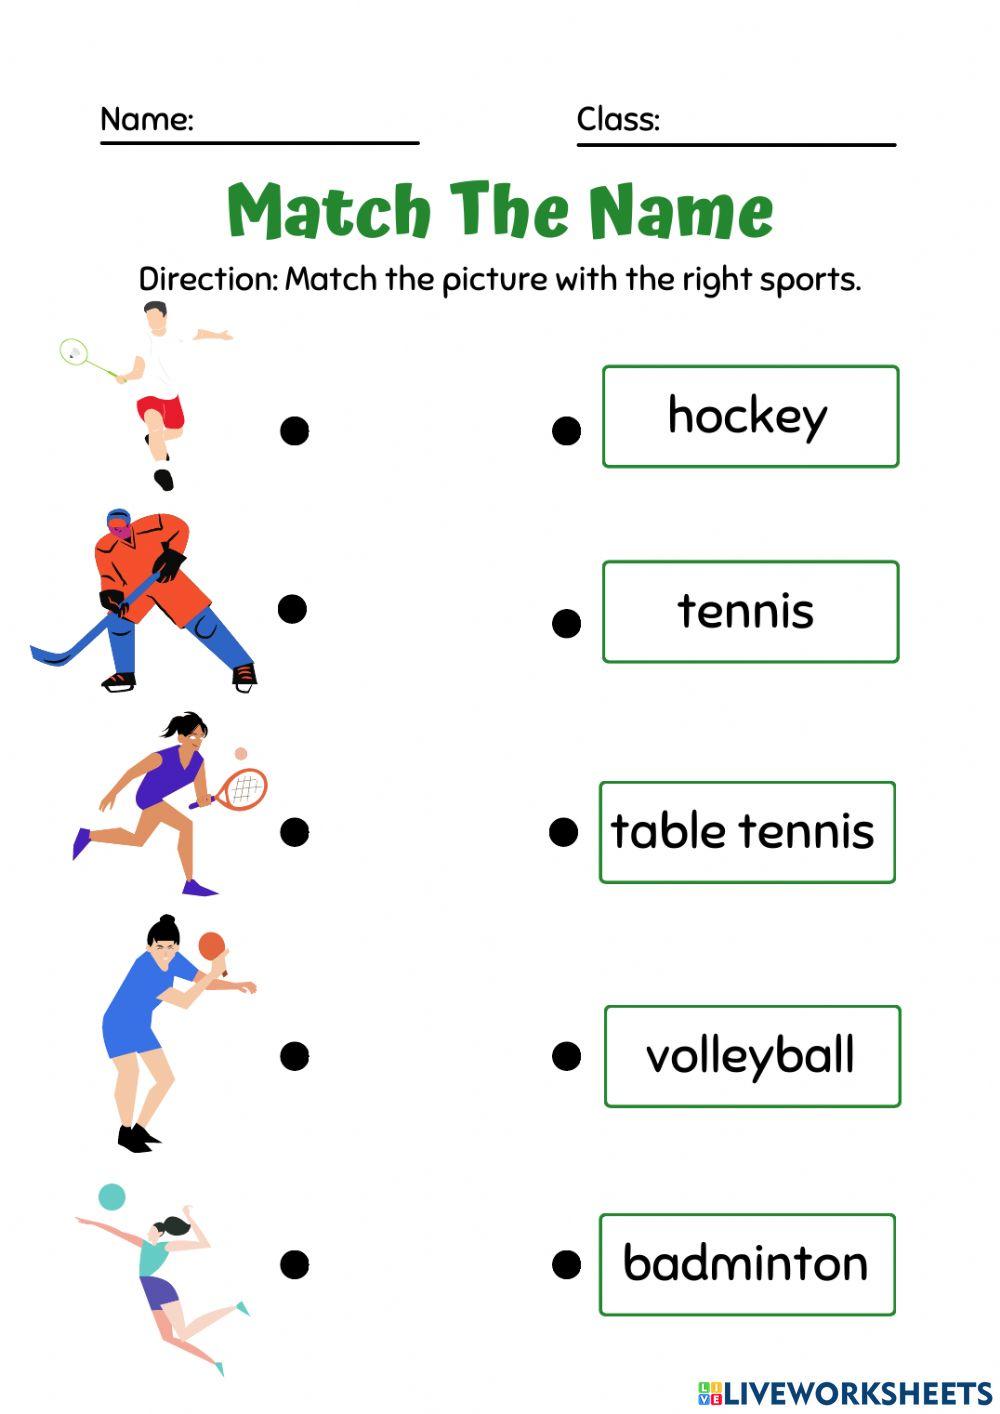 Sports subjects